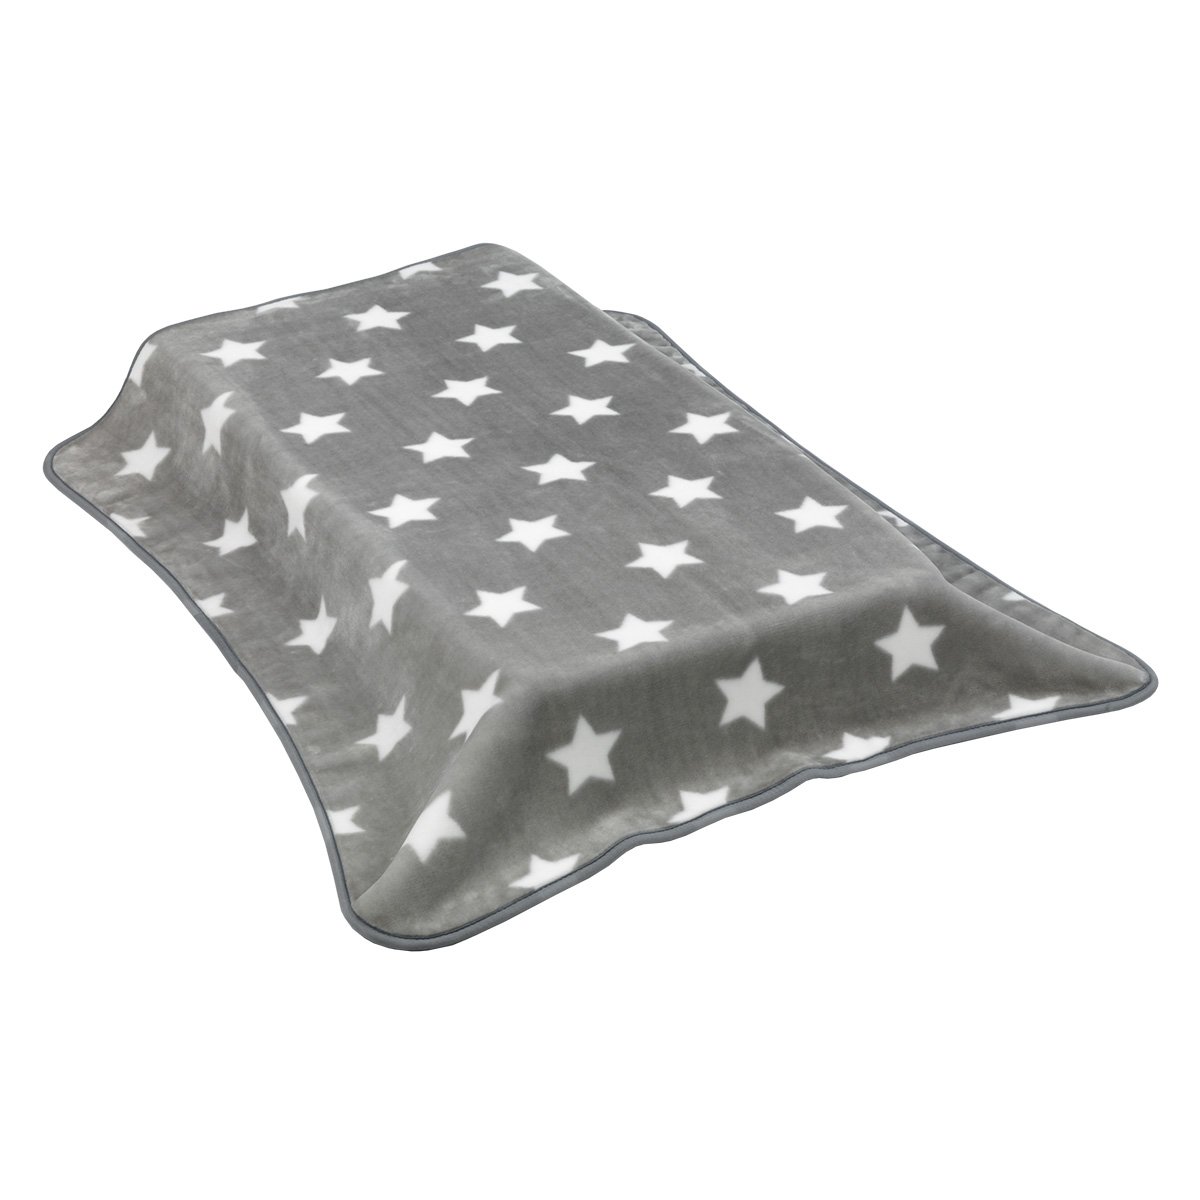 Cambrass 39101 Day, Star Blanket Bed 110 x 140 cm Grey